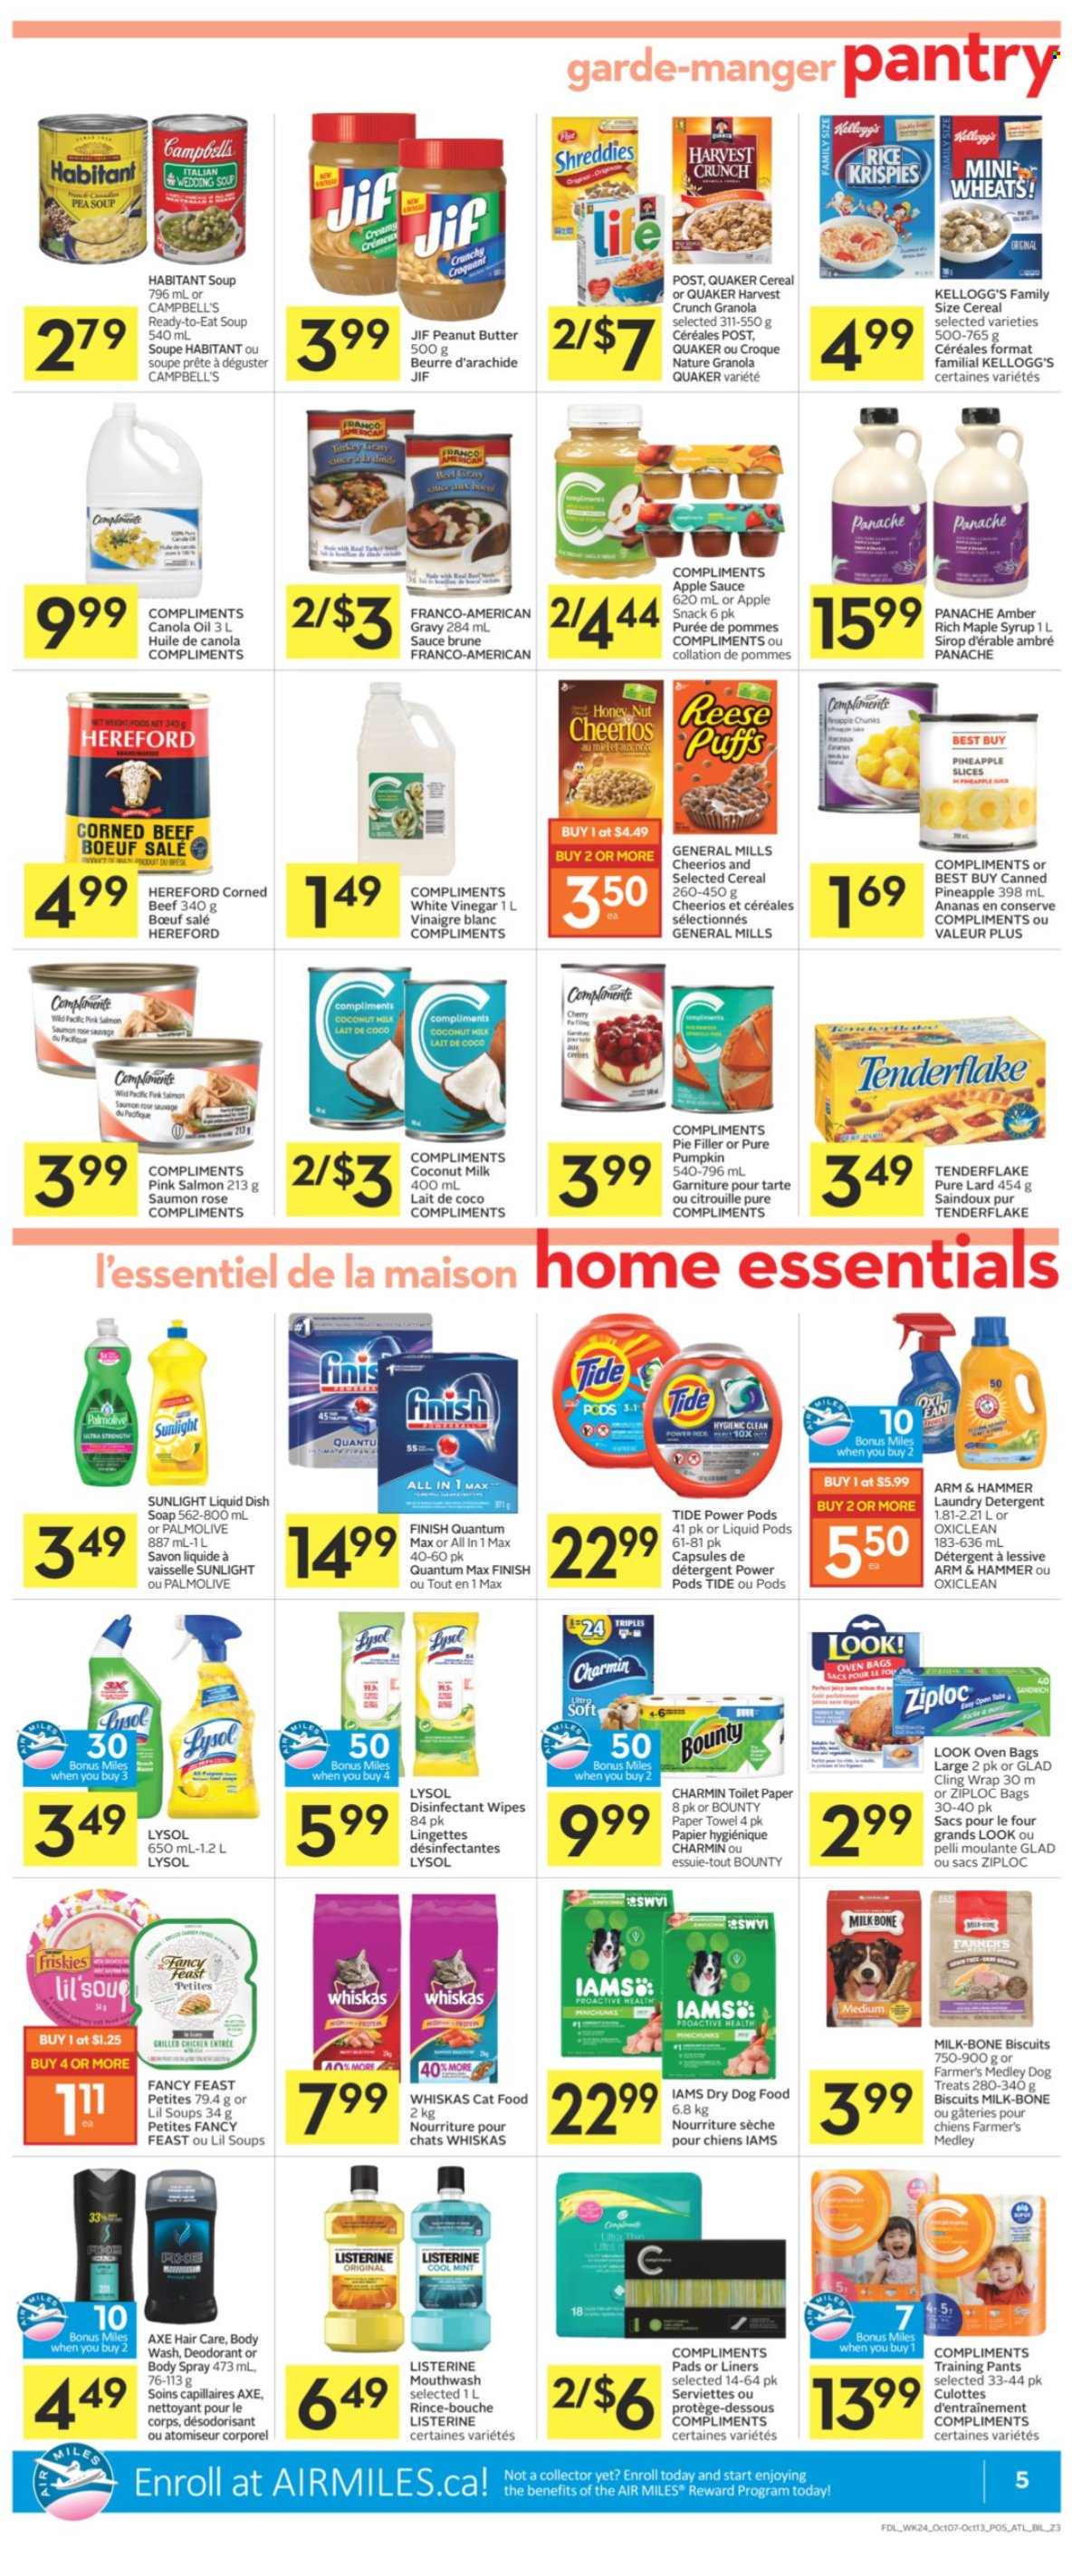 thumbnail - Co-op Flyer - October 07, 2021 - October 13, 2021 - Sales products - pie, puffs, pumpkin, pineapple, Campbell's, sandwich, soup, Quaker, corned beef, snack, Bounty, Kellogg's, biscuit, ARM & HAMMER, coconut milk, cereals, Cheerios, Rice Krispies, canola oil, vinegar, oil, apple sauce, maple syrup, peanut butter, syrup, Jif, rosé wine, beef meat, detergent, granola, lard, Listerine, Whiskas, desinfection, deodorant. Page 5.